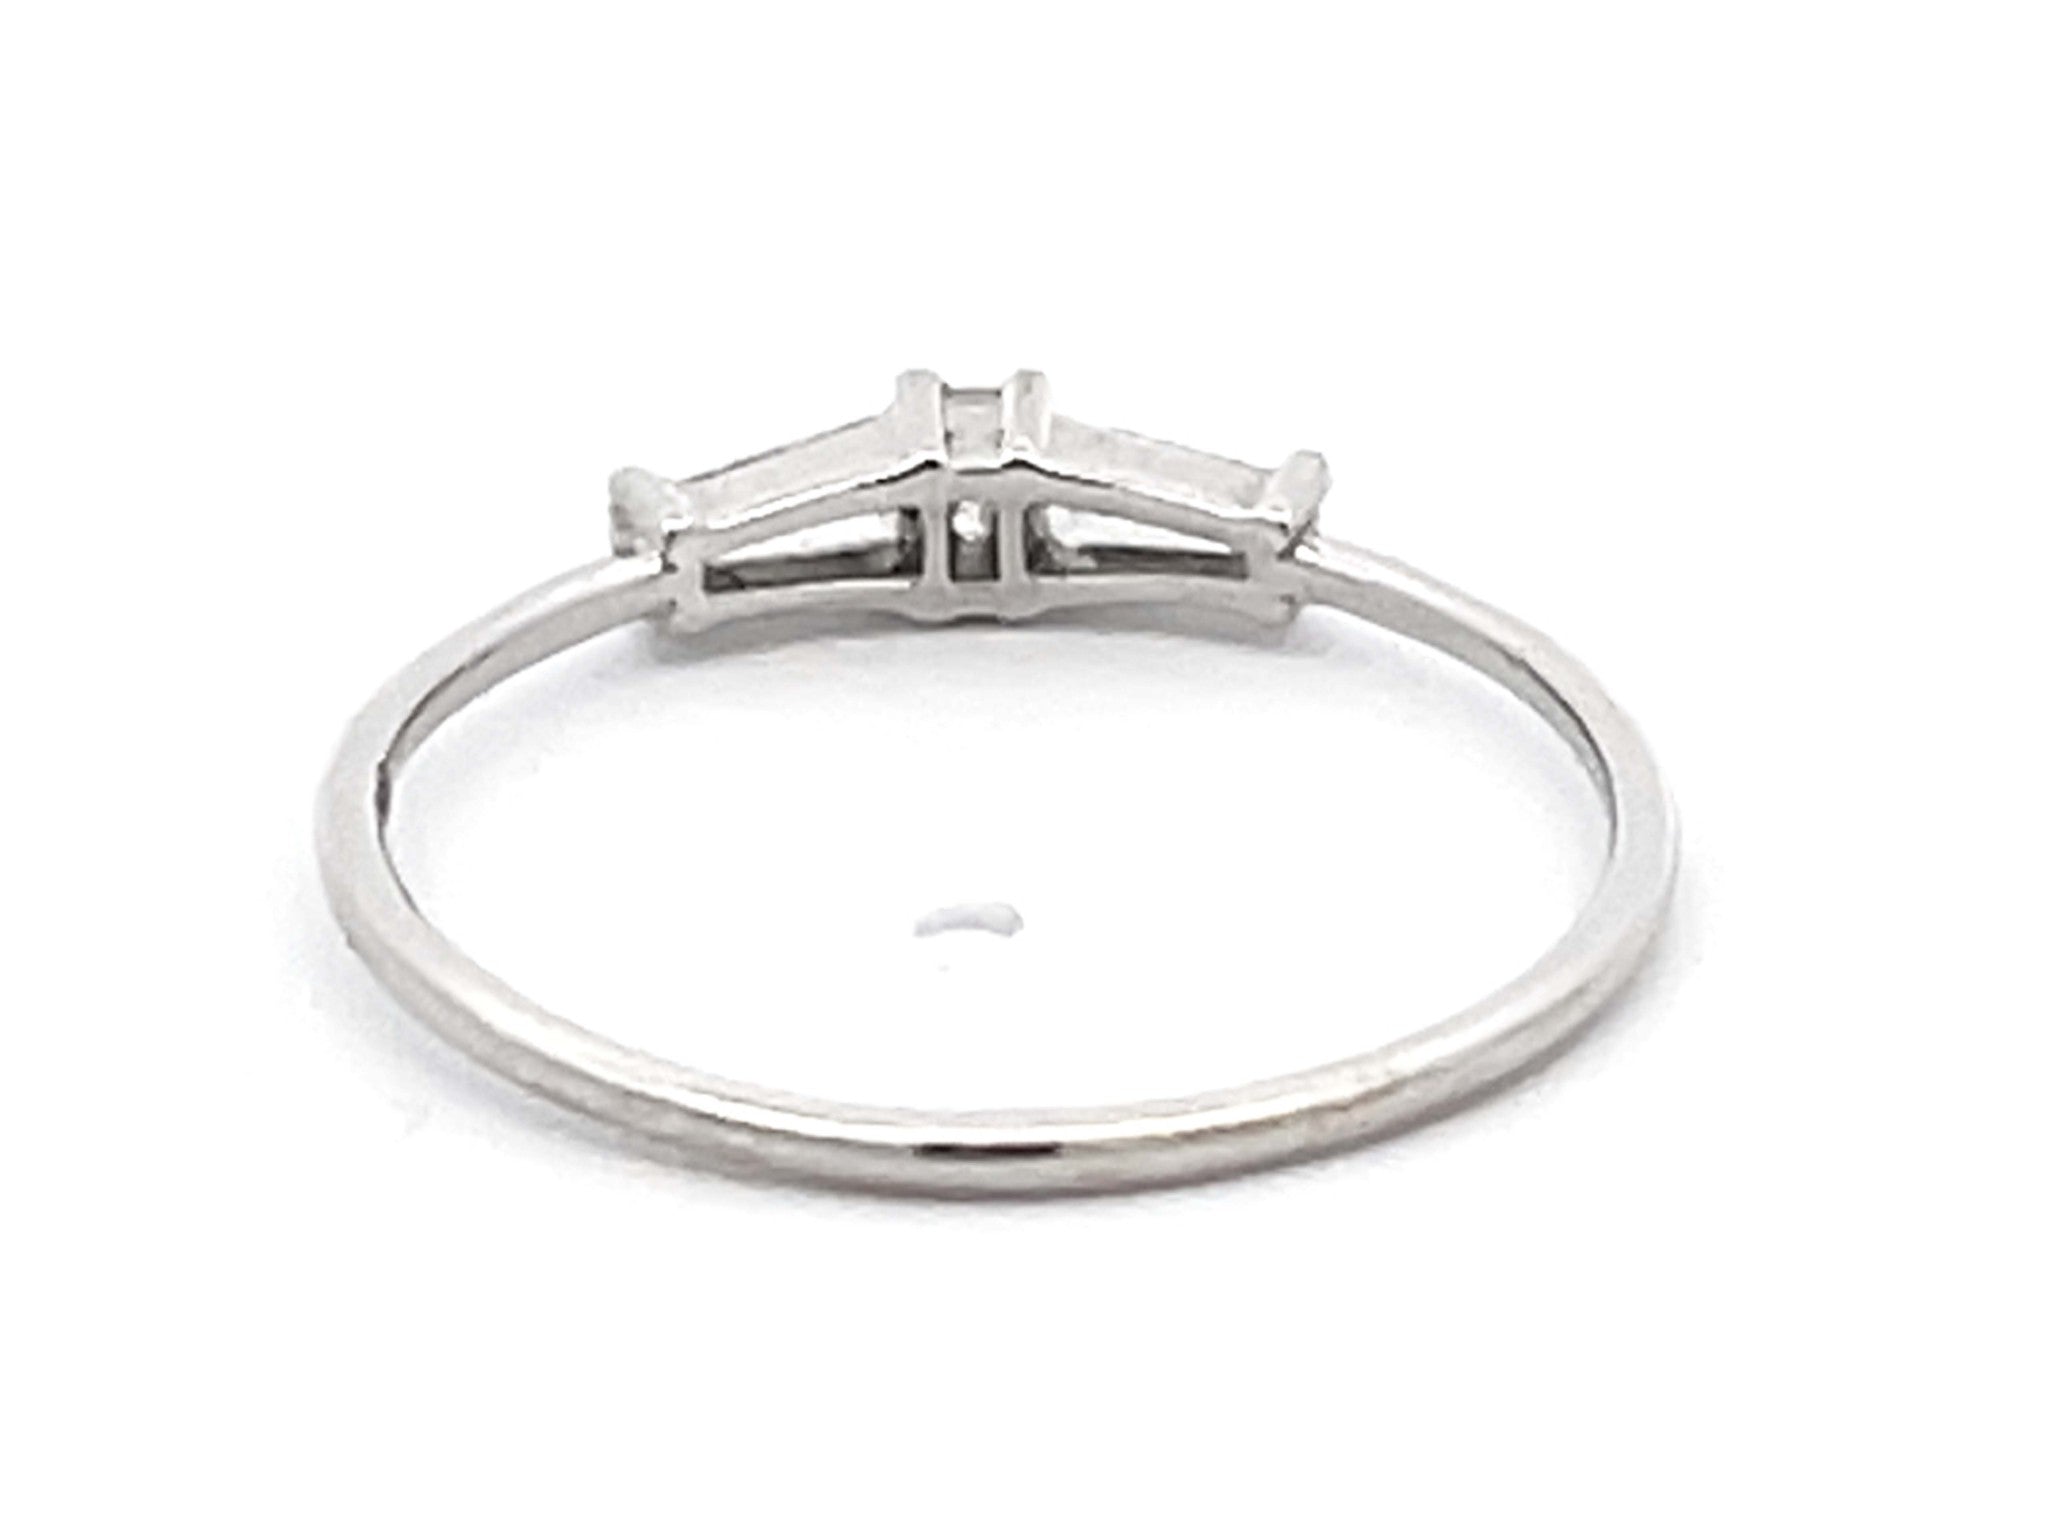 Three Baguette Diamond Thin Band Ring in 14k White Gold